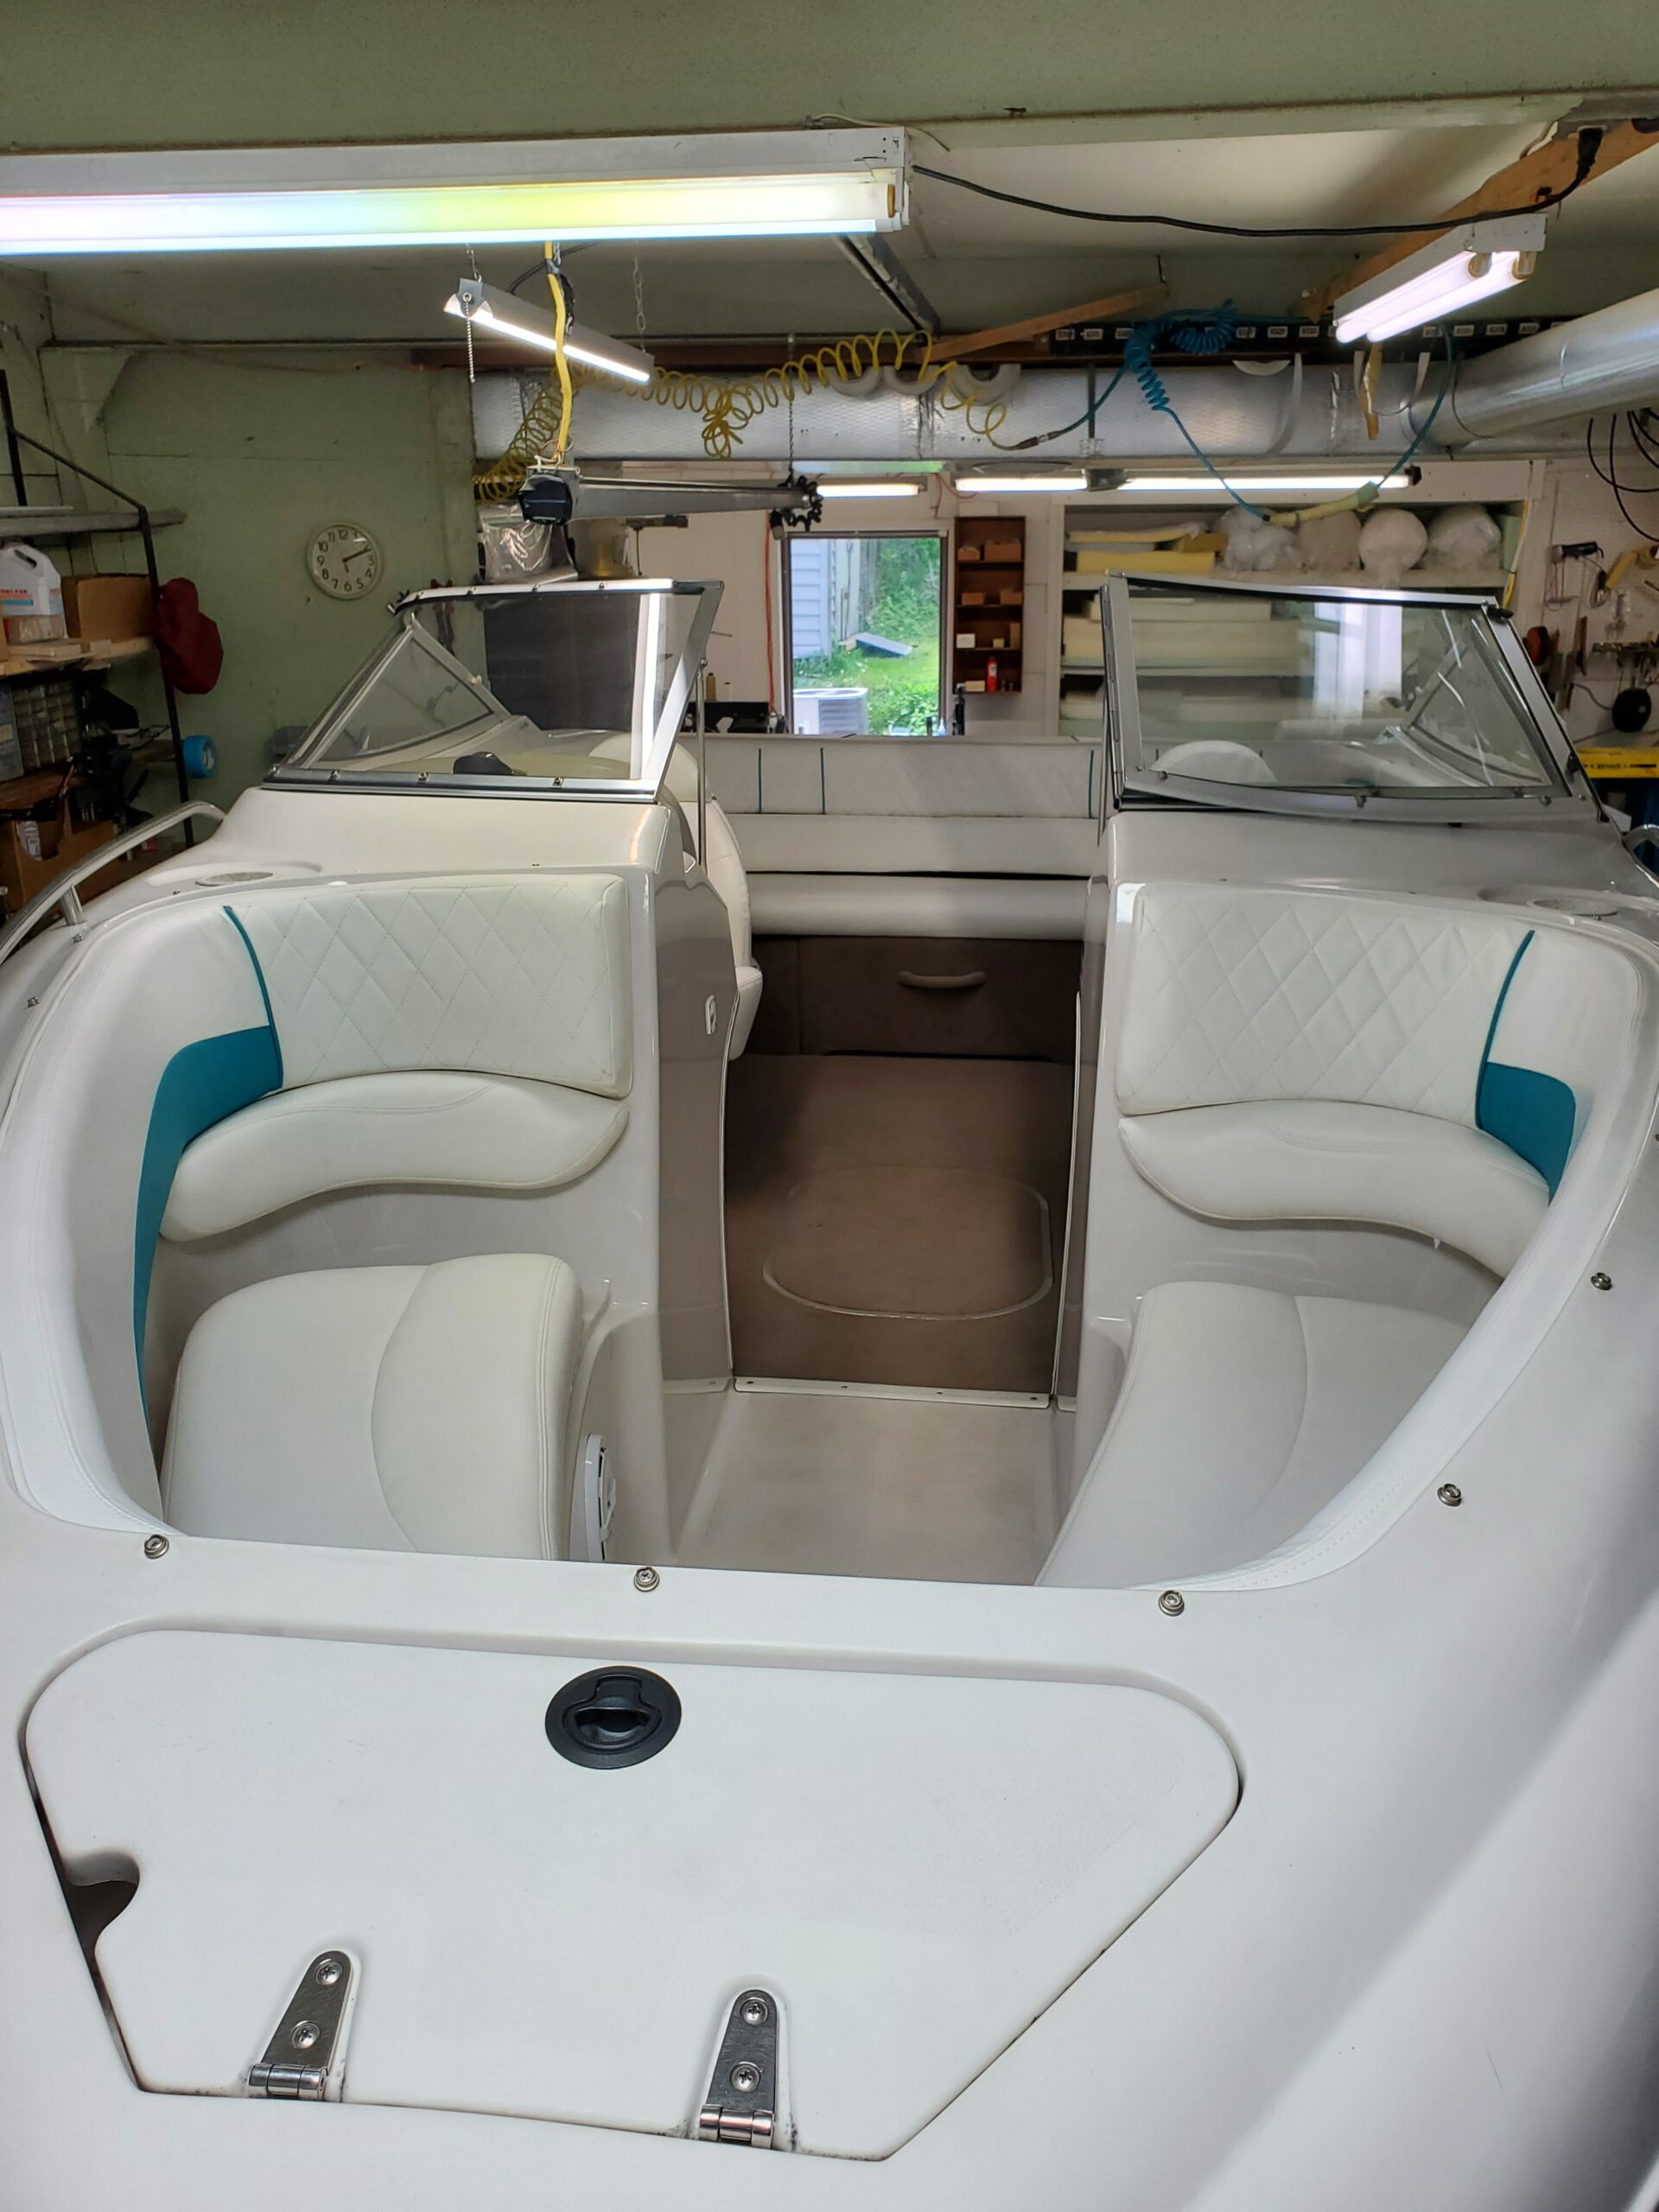 The Benefits of Upholstering a Boat